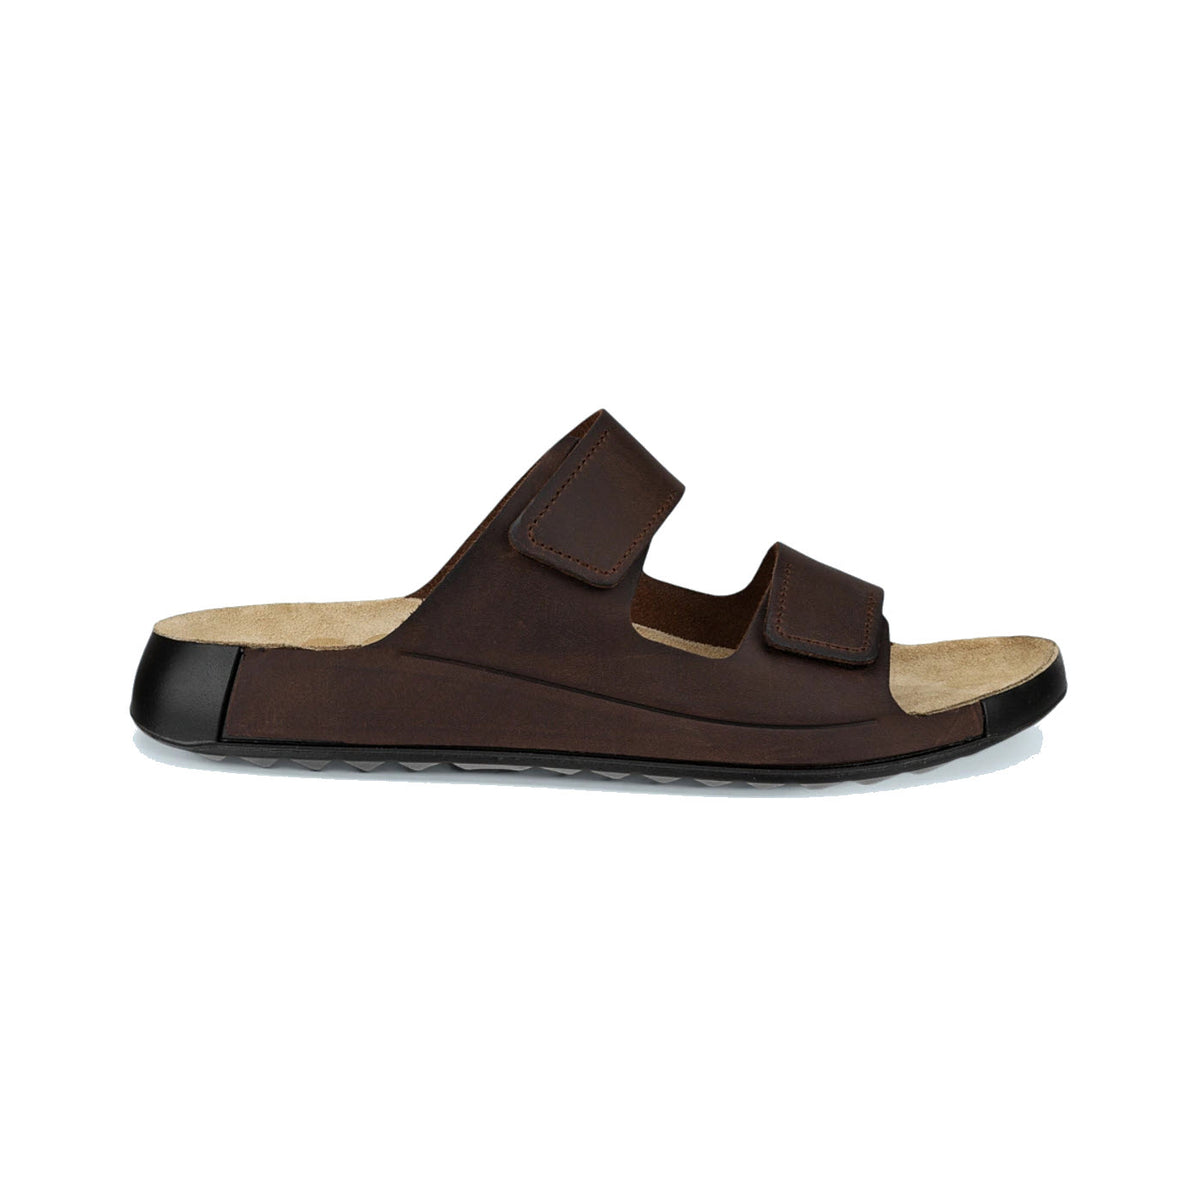 Brown ECCO 2ND COZMO M Two Band Slide sandal featuring premium leather, with two adjustable straps and a cork footbed, isolated on a white background.